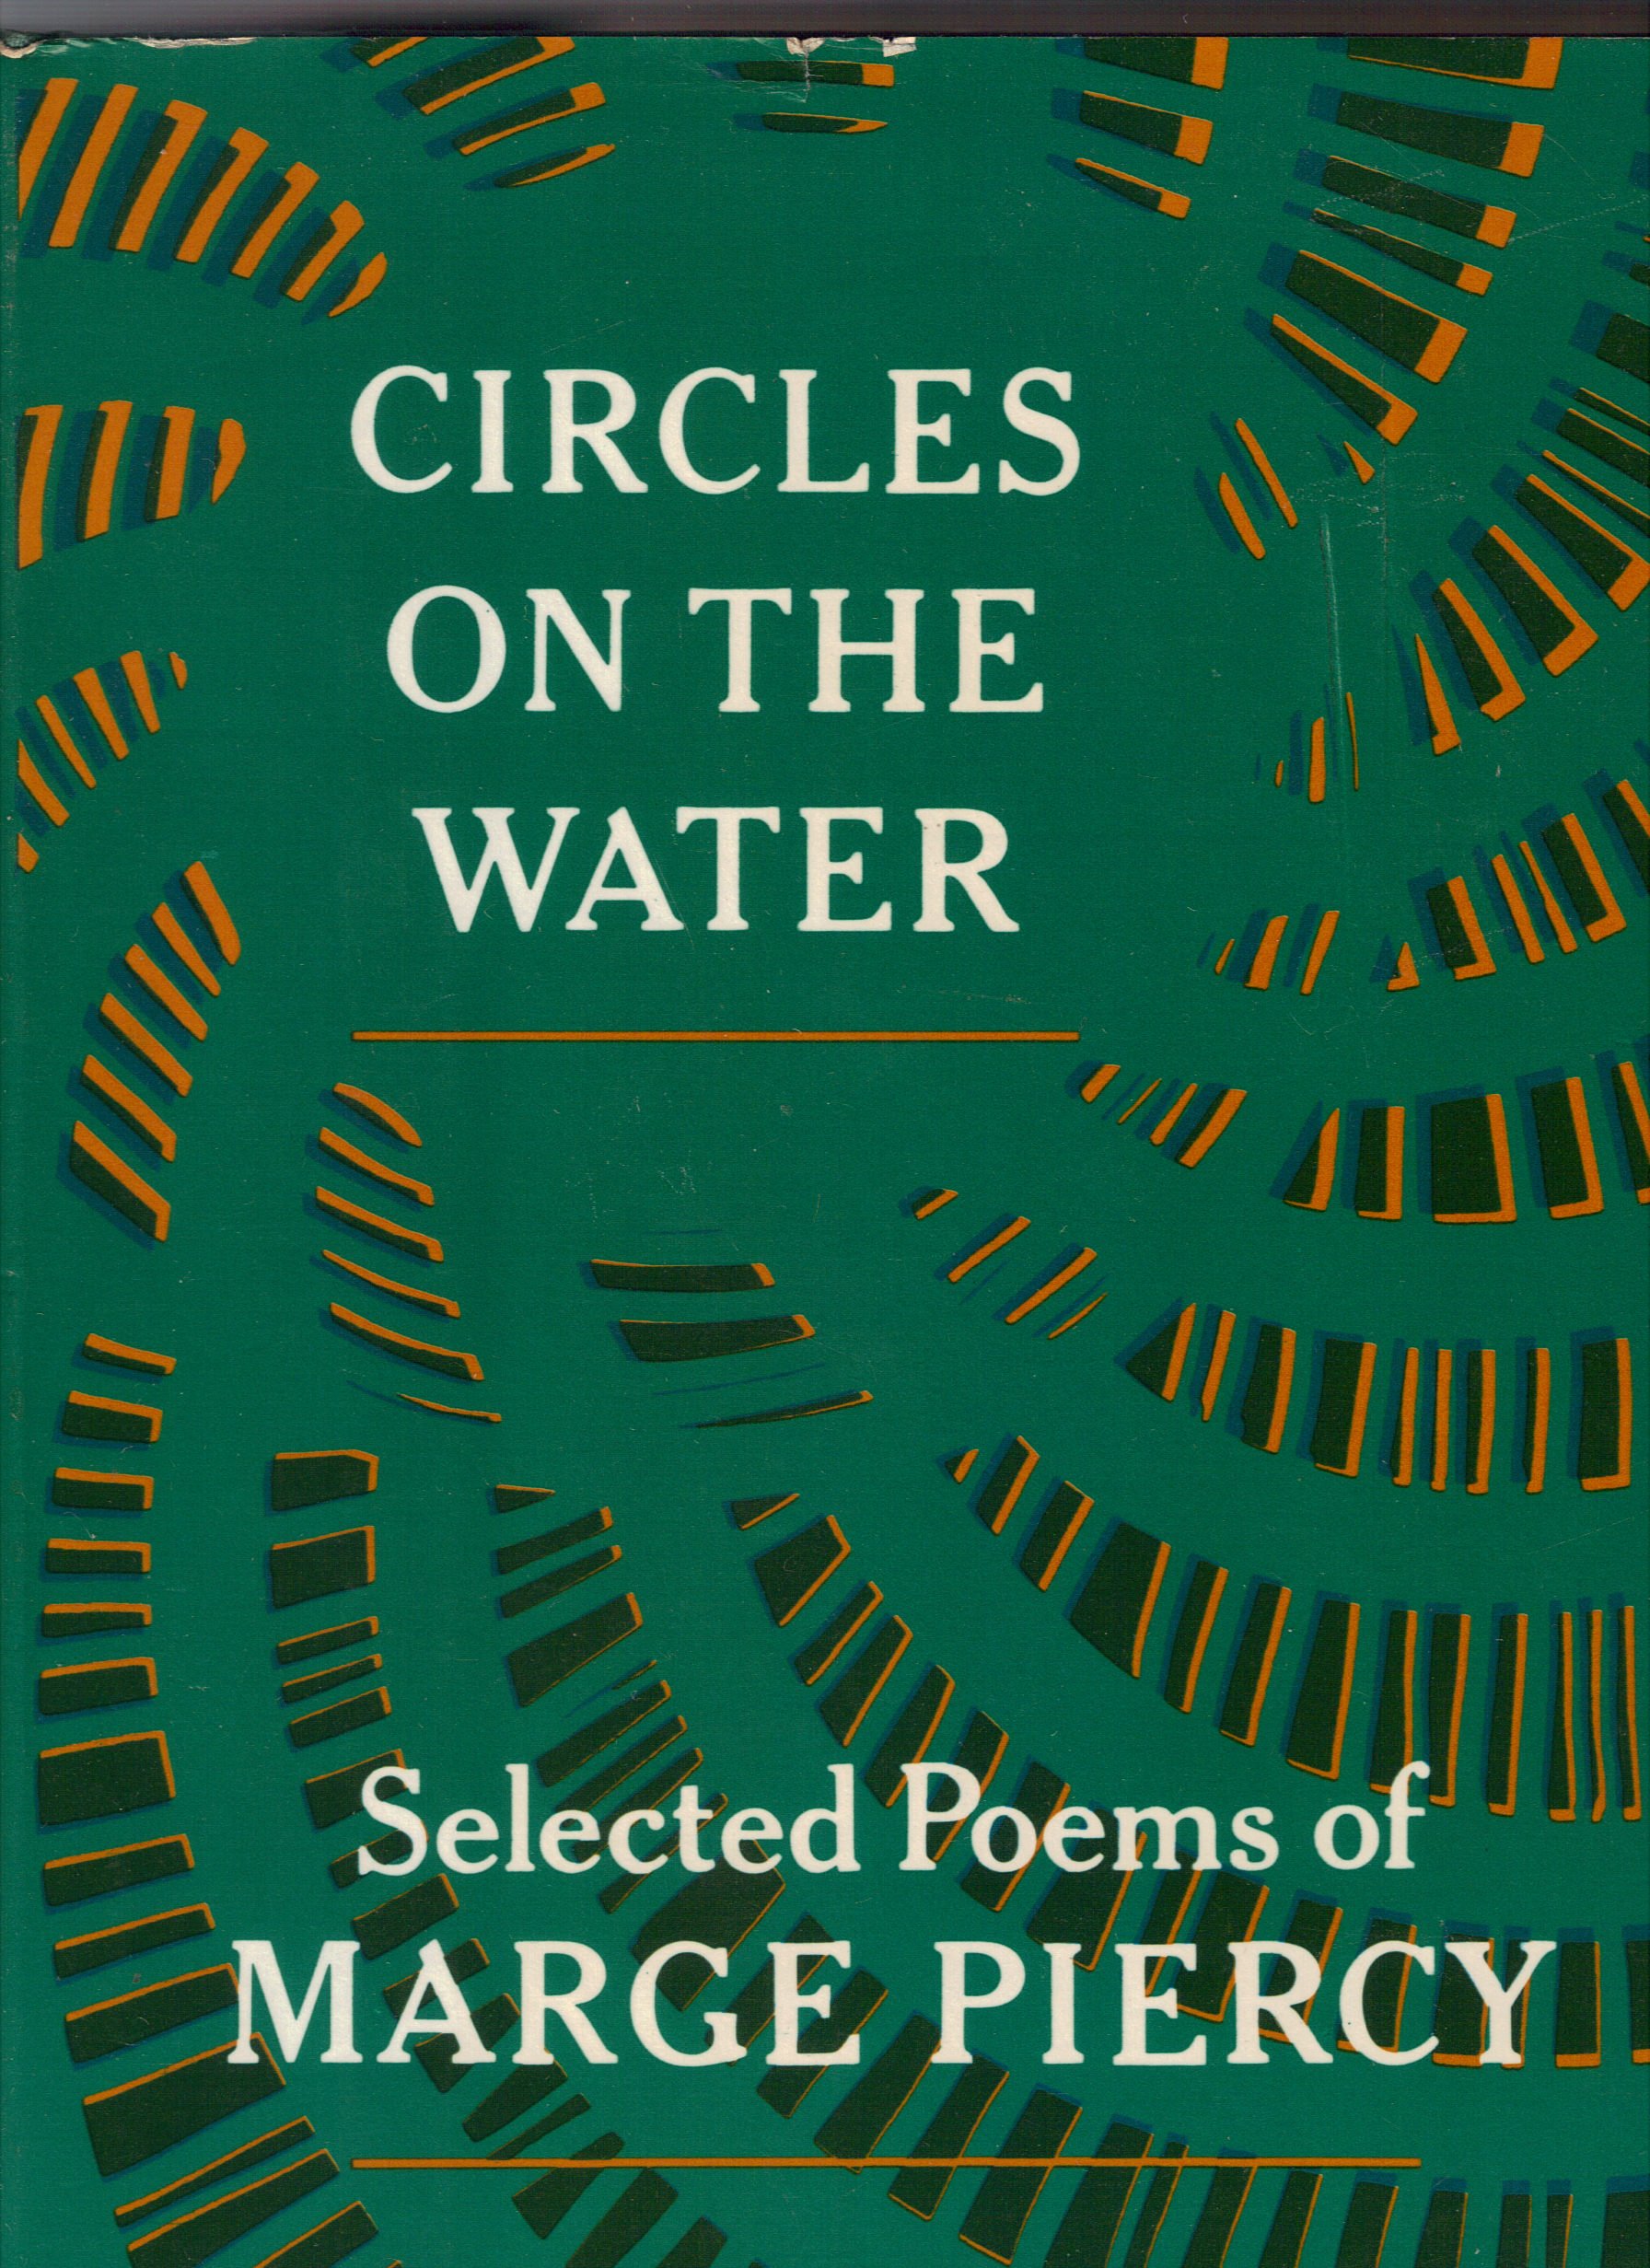 Circles on the Water by Marge Piercy (book cover)